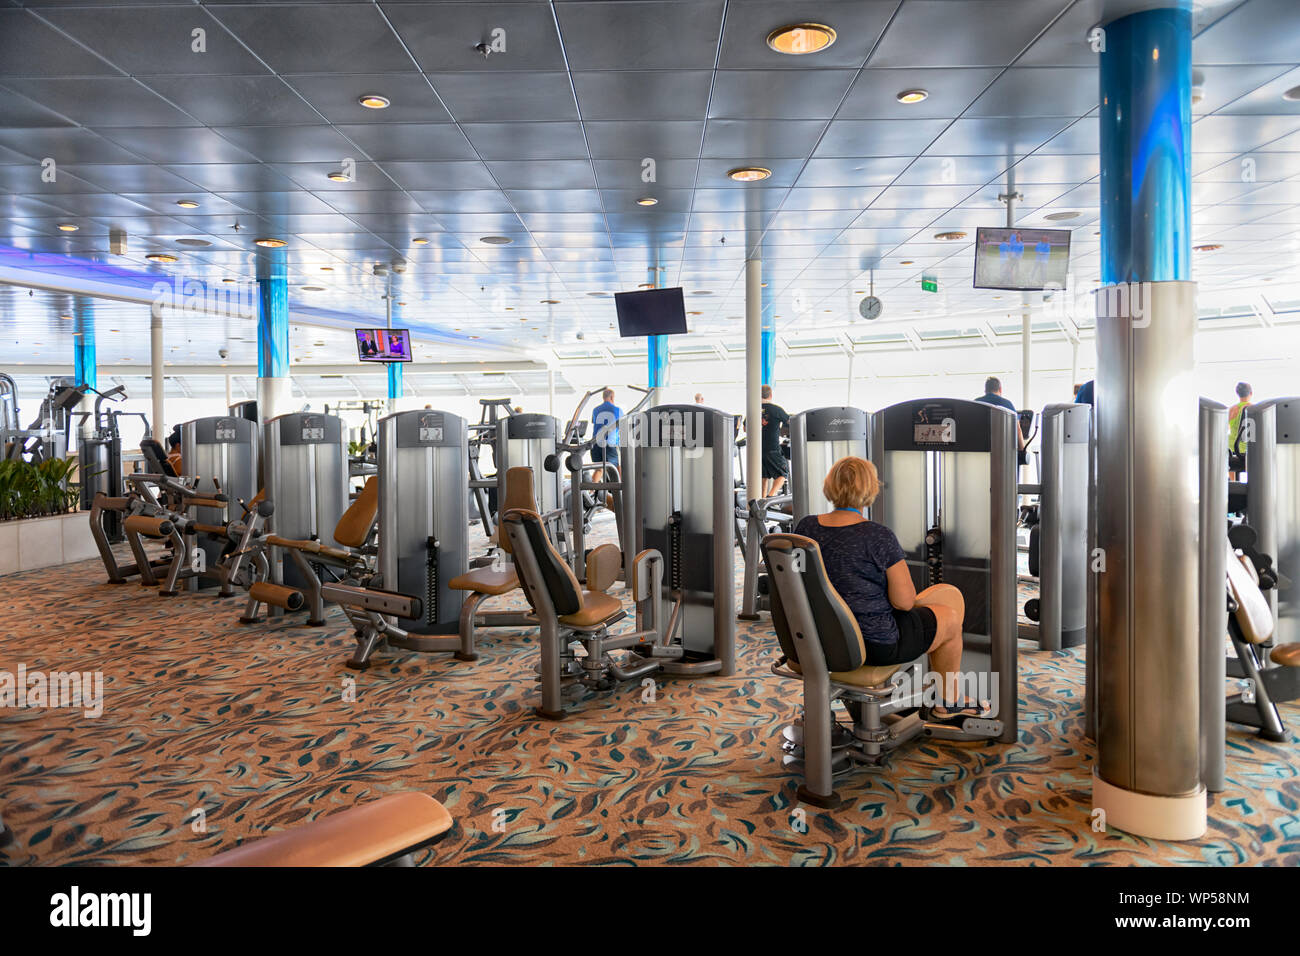 Independence of the seas interior gym sport leisure recreation activity gymnasium equipment Royal Caribbean cruise ship ships Independence of the seas Stock Photo